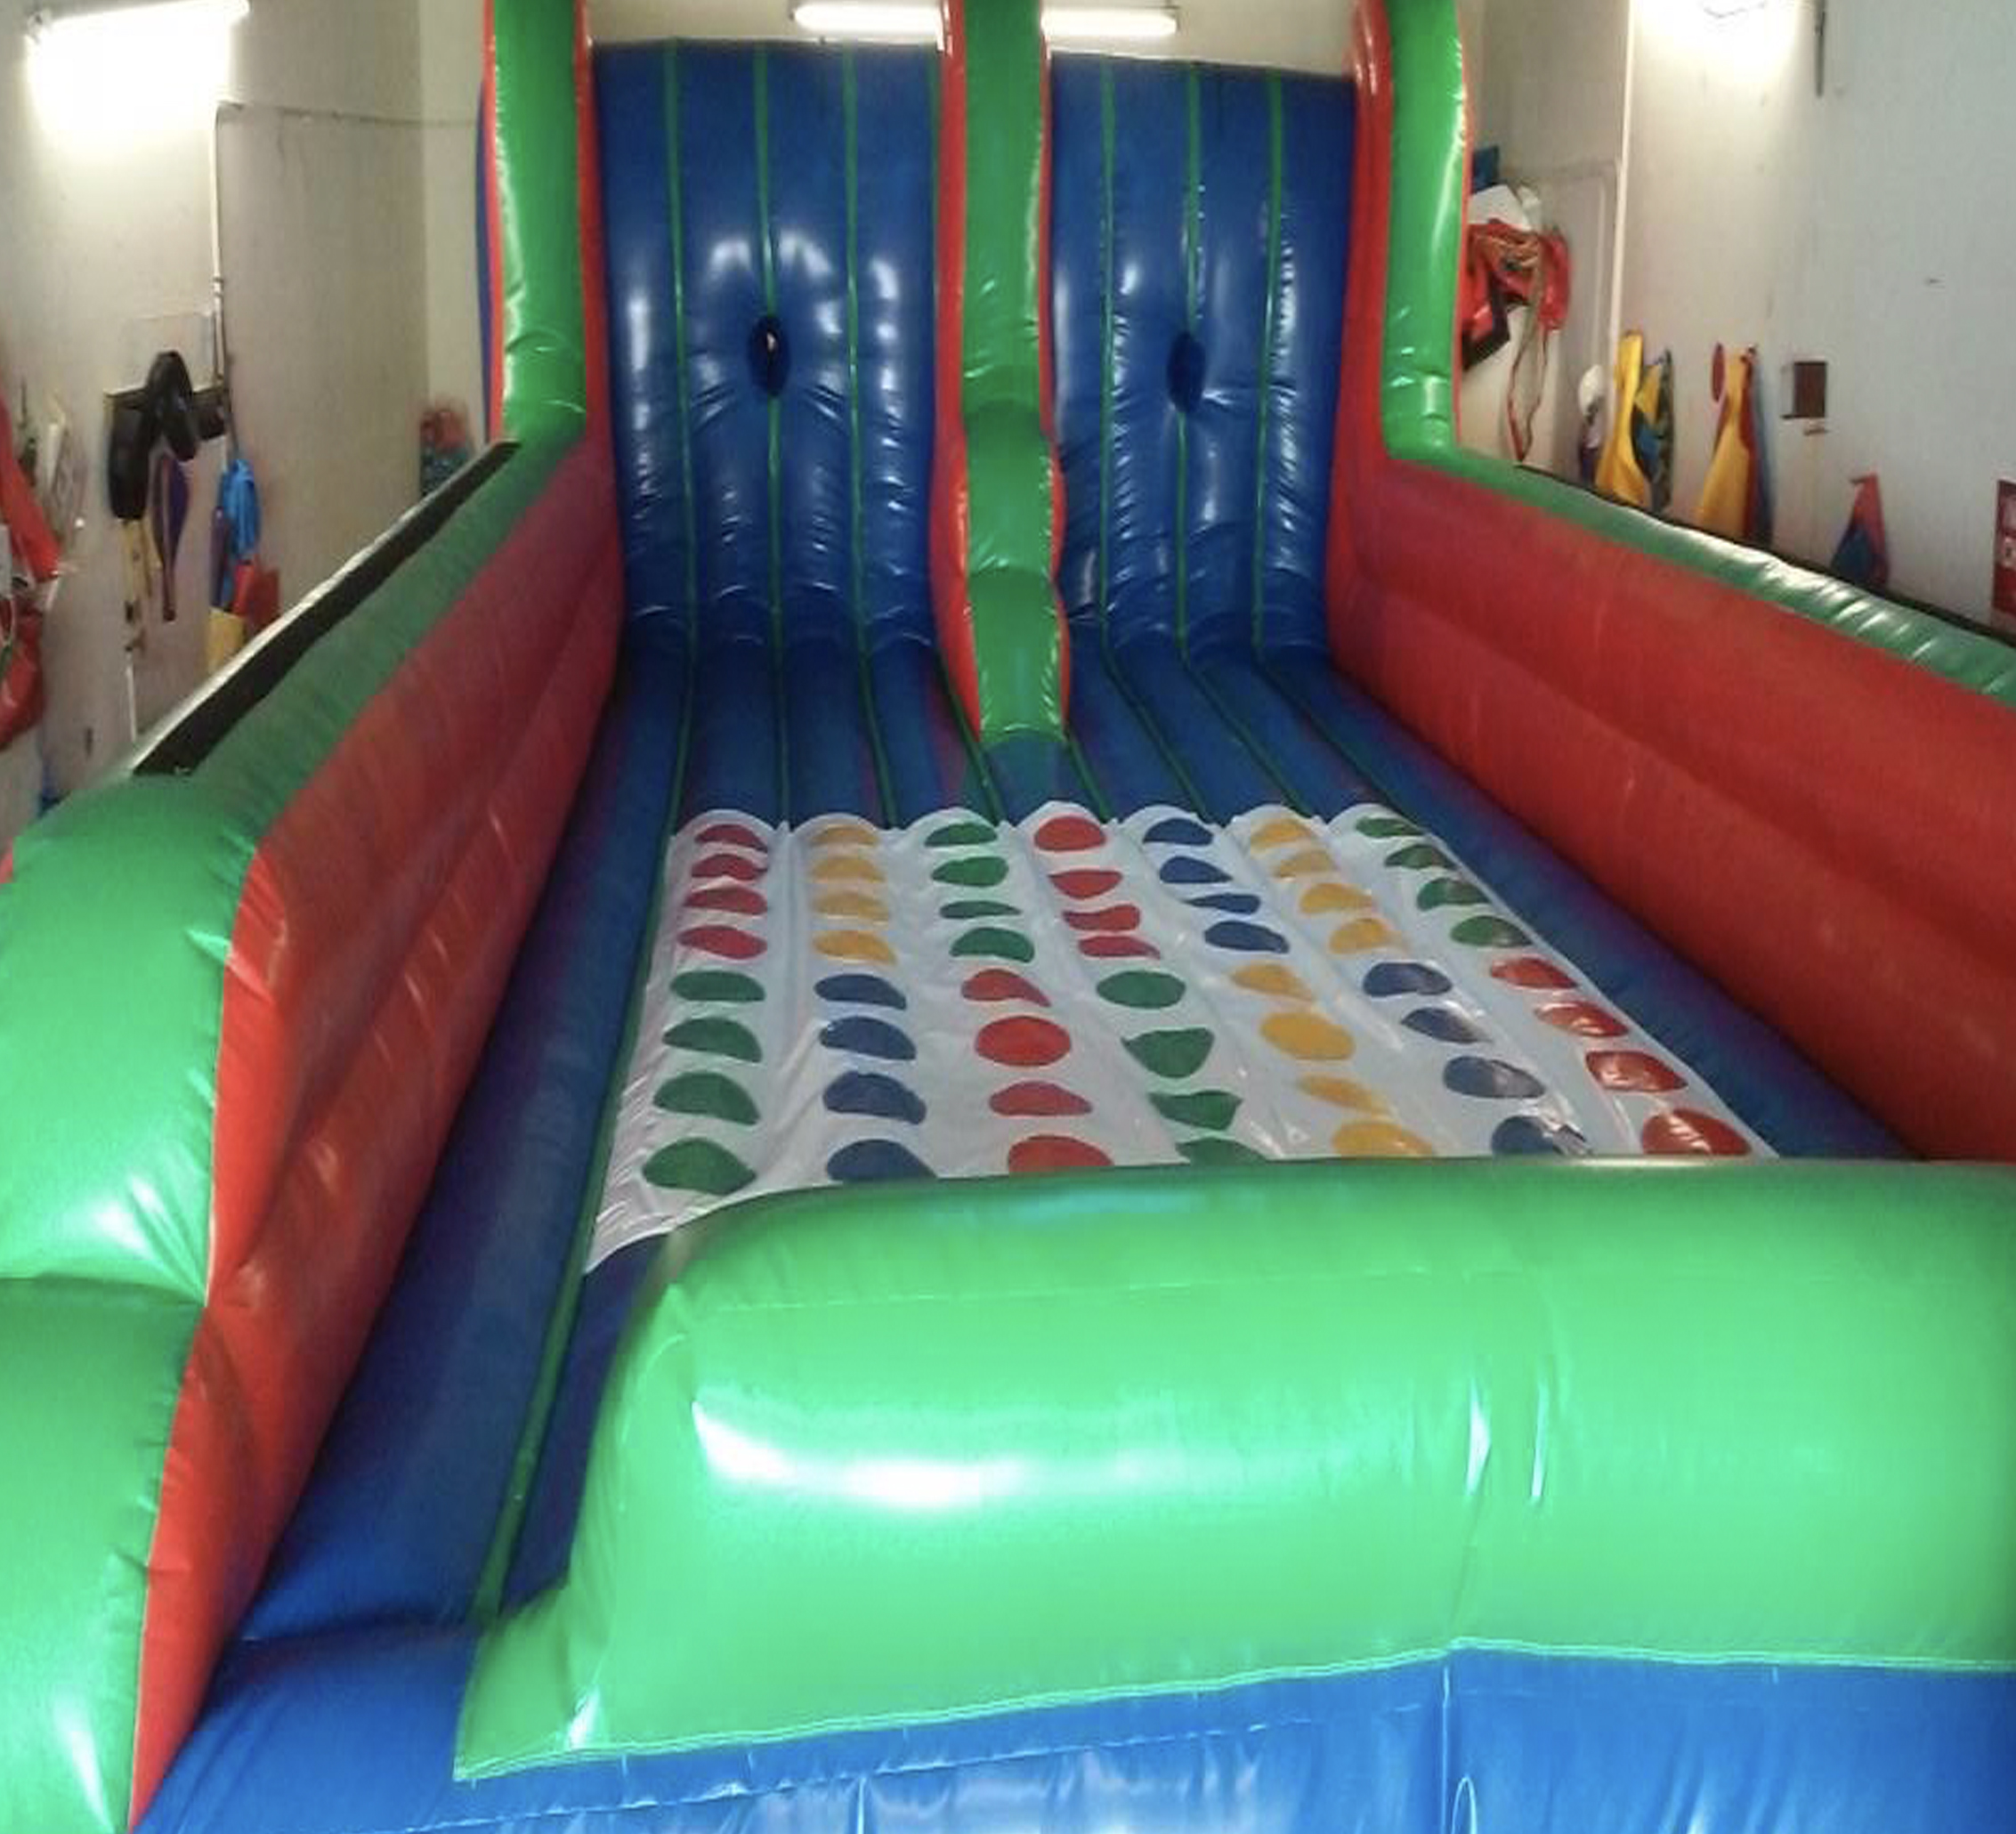 Inflatable Game Rental Near Me | Bungee Run and Joust | Shelf Service Bouncers